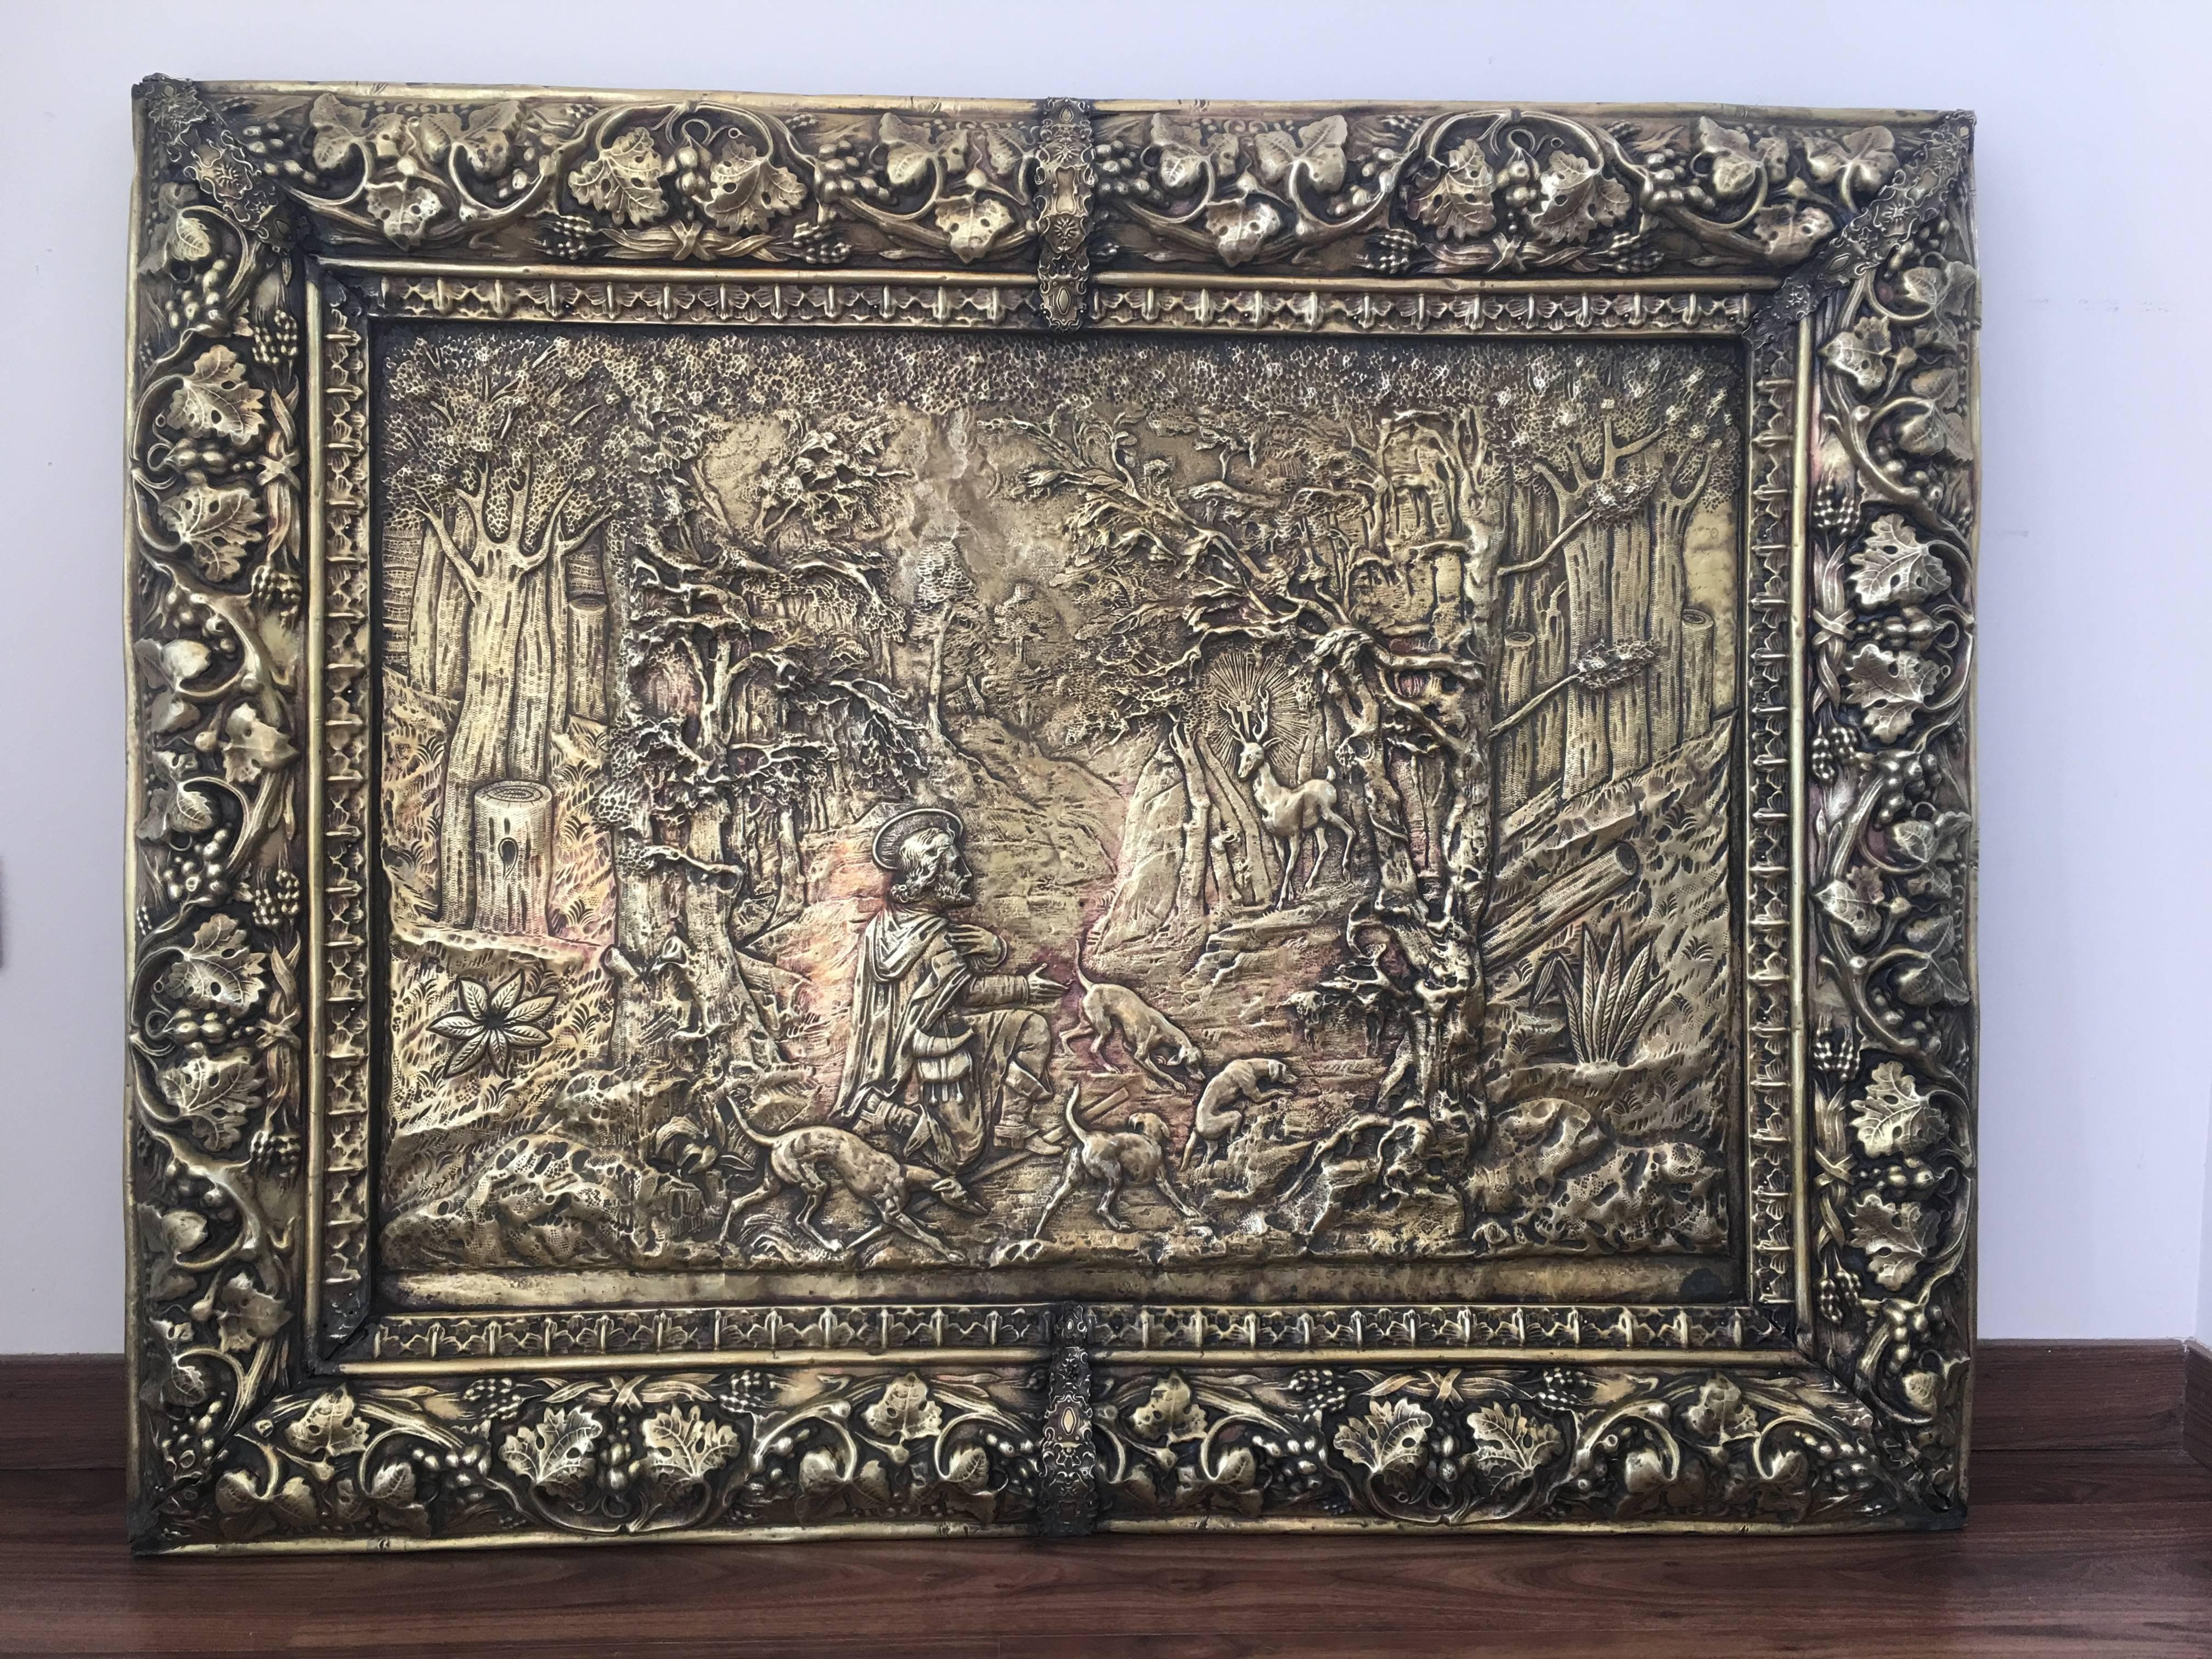 Large 47´picture and frame in brass Louis XVI style, France, circa 1900-1920
The picture depicting a landscape scene of a Saint Hubertus

Saint Hubertus
